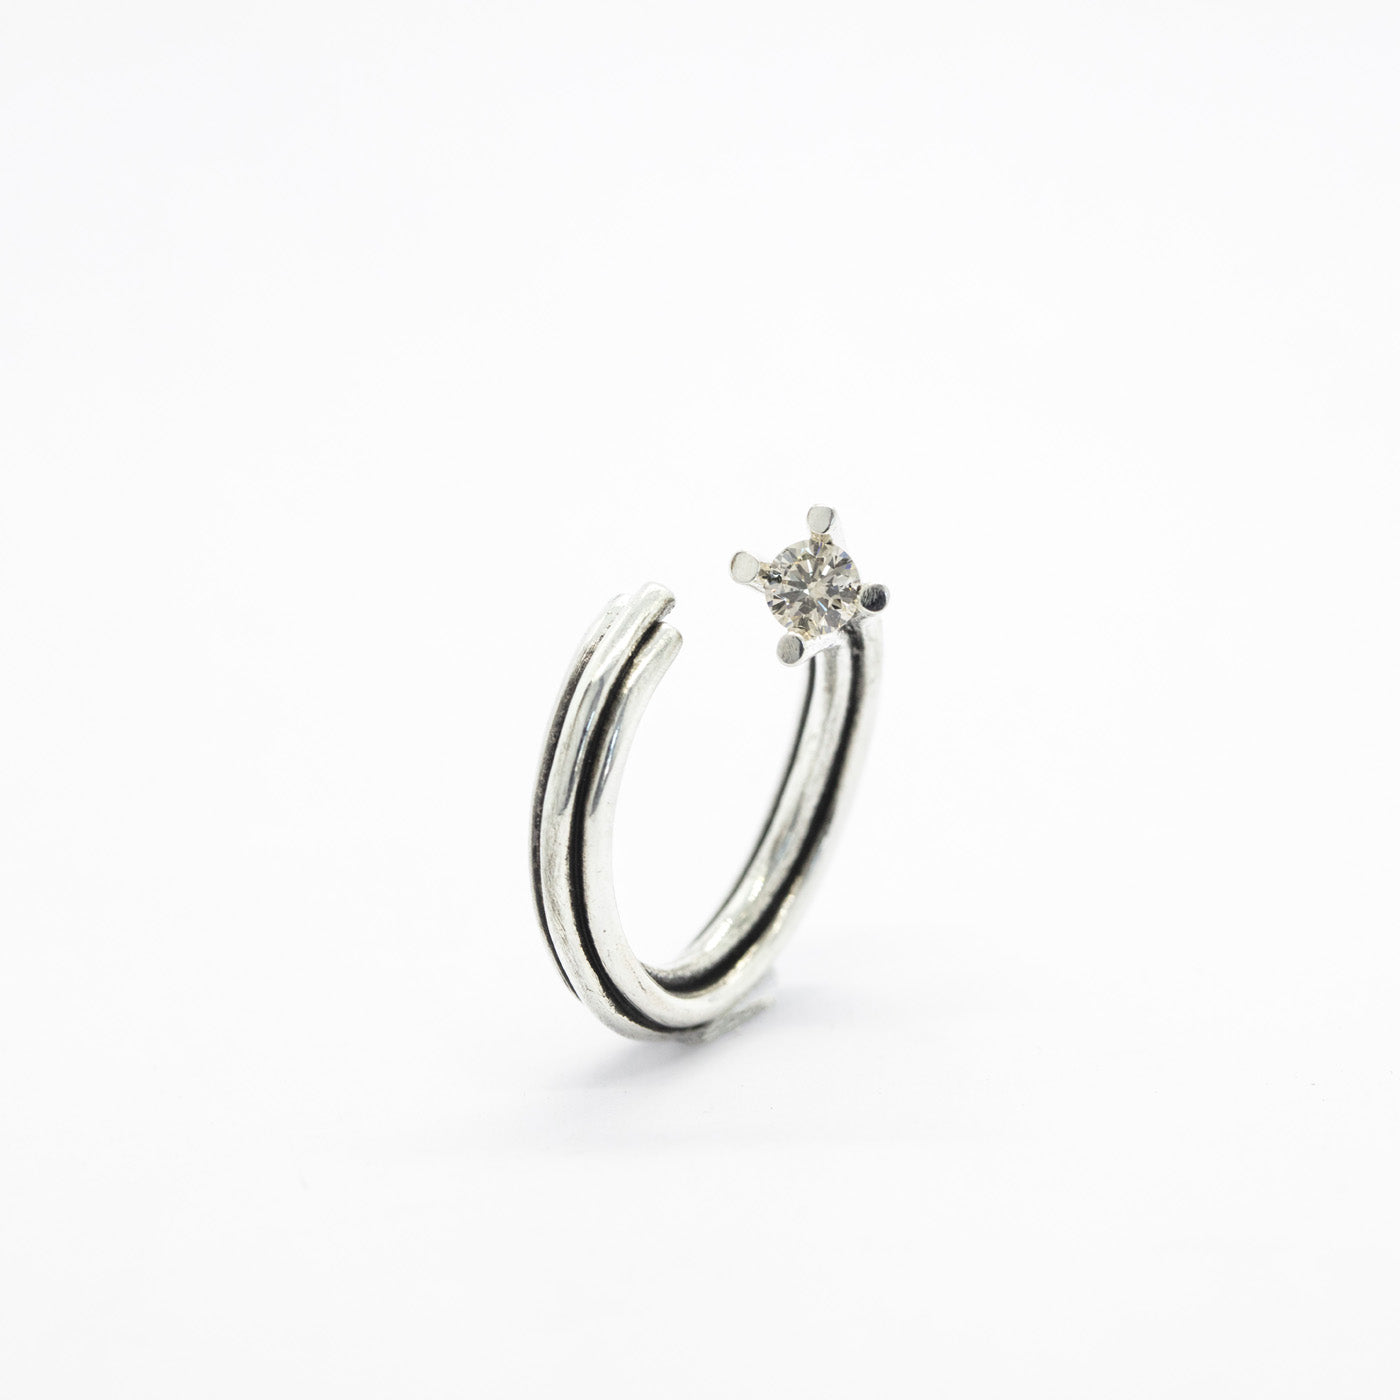 ring vortex silver 0.33ct champagne diamond front product view innan jewellery independent atelier berlin